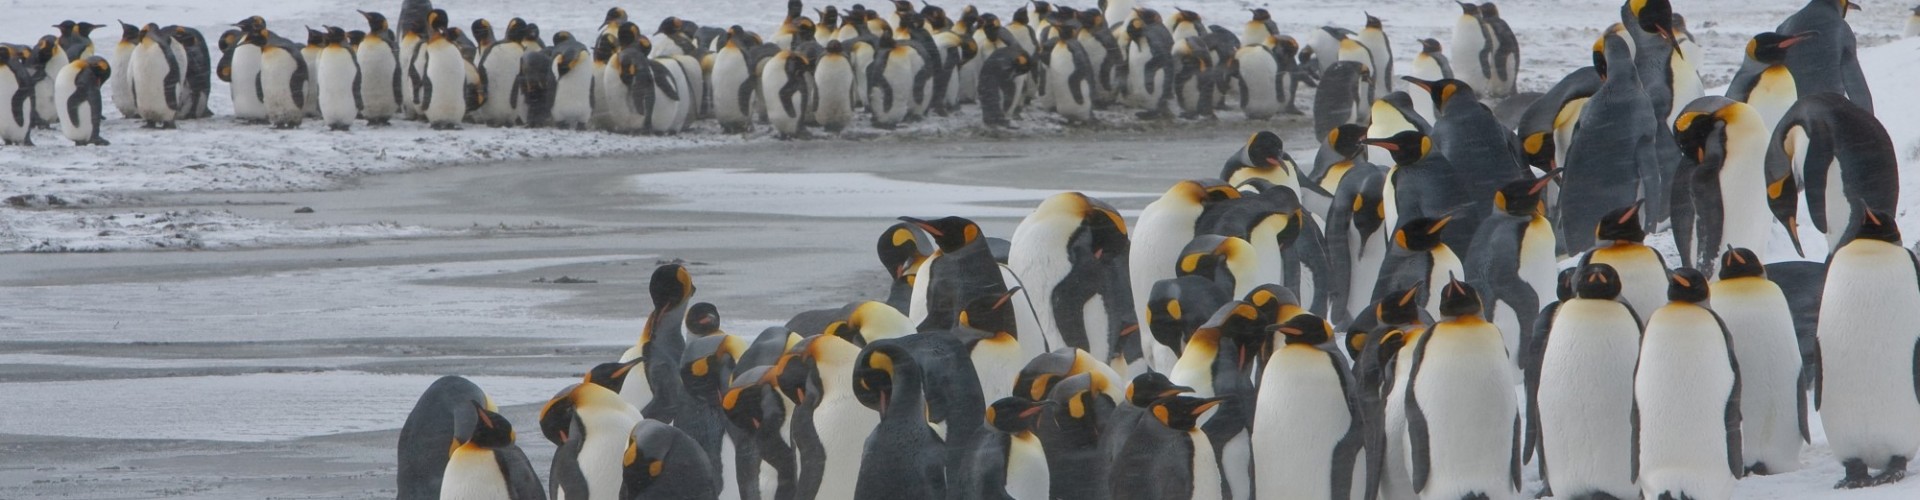 Antarctica - South Georgia - Oceanwide - King Penguin colony in a snowy setting by Jan Veen